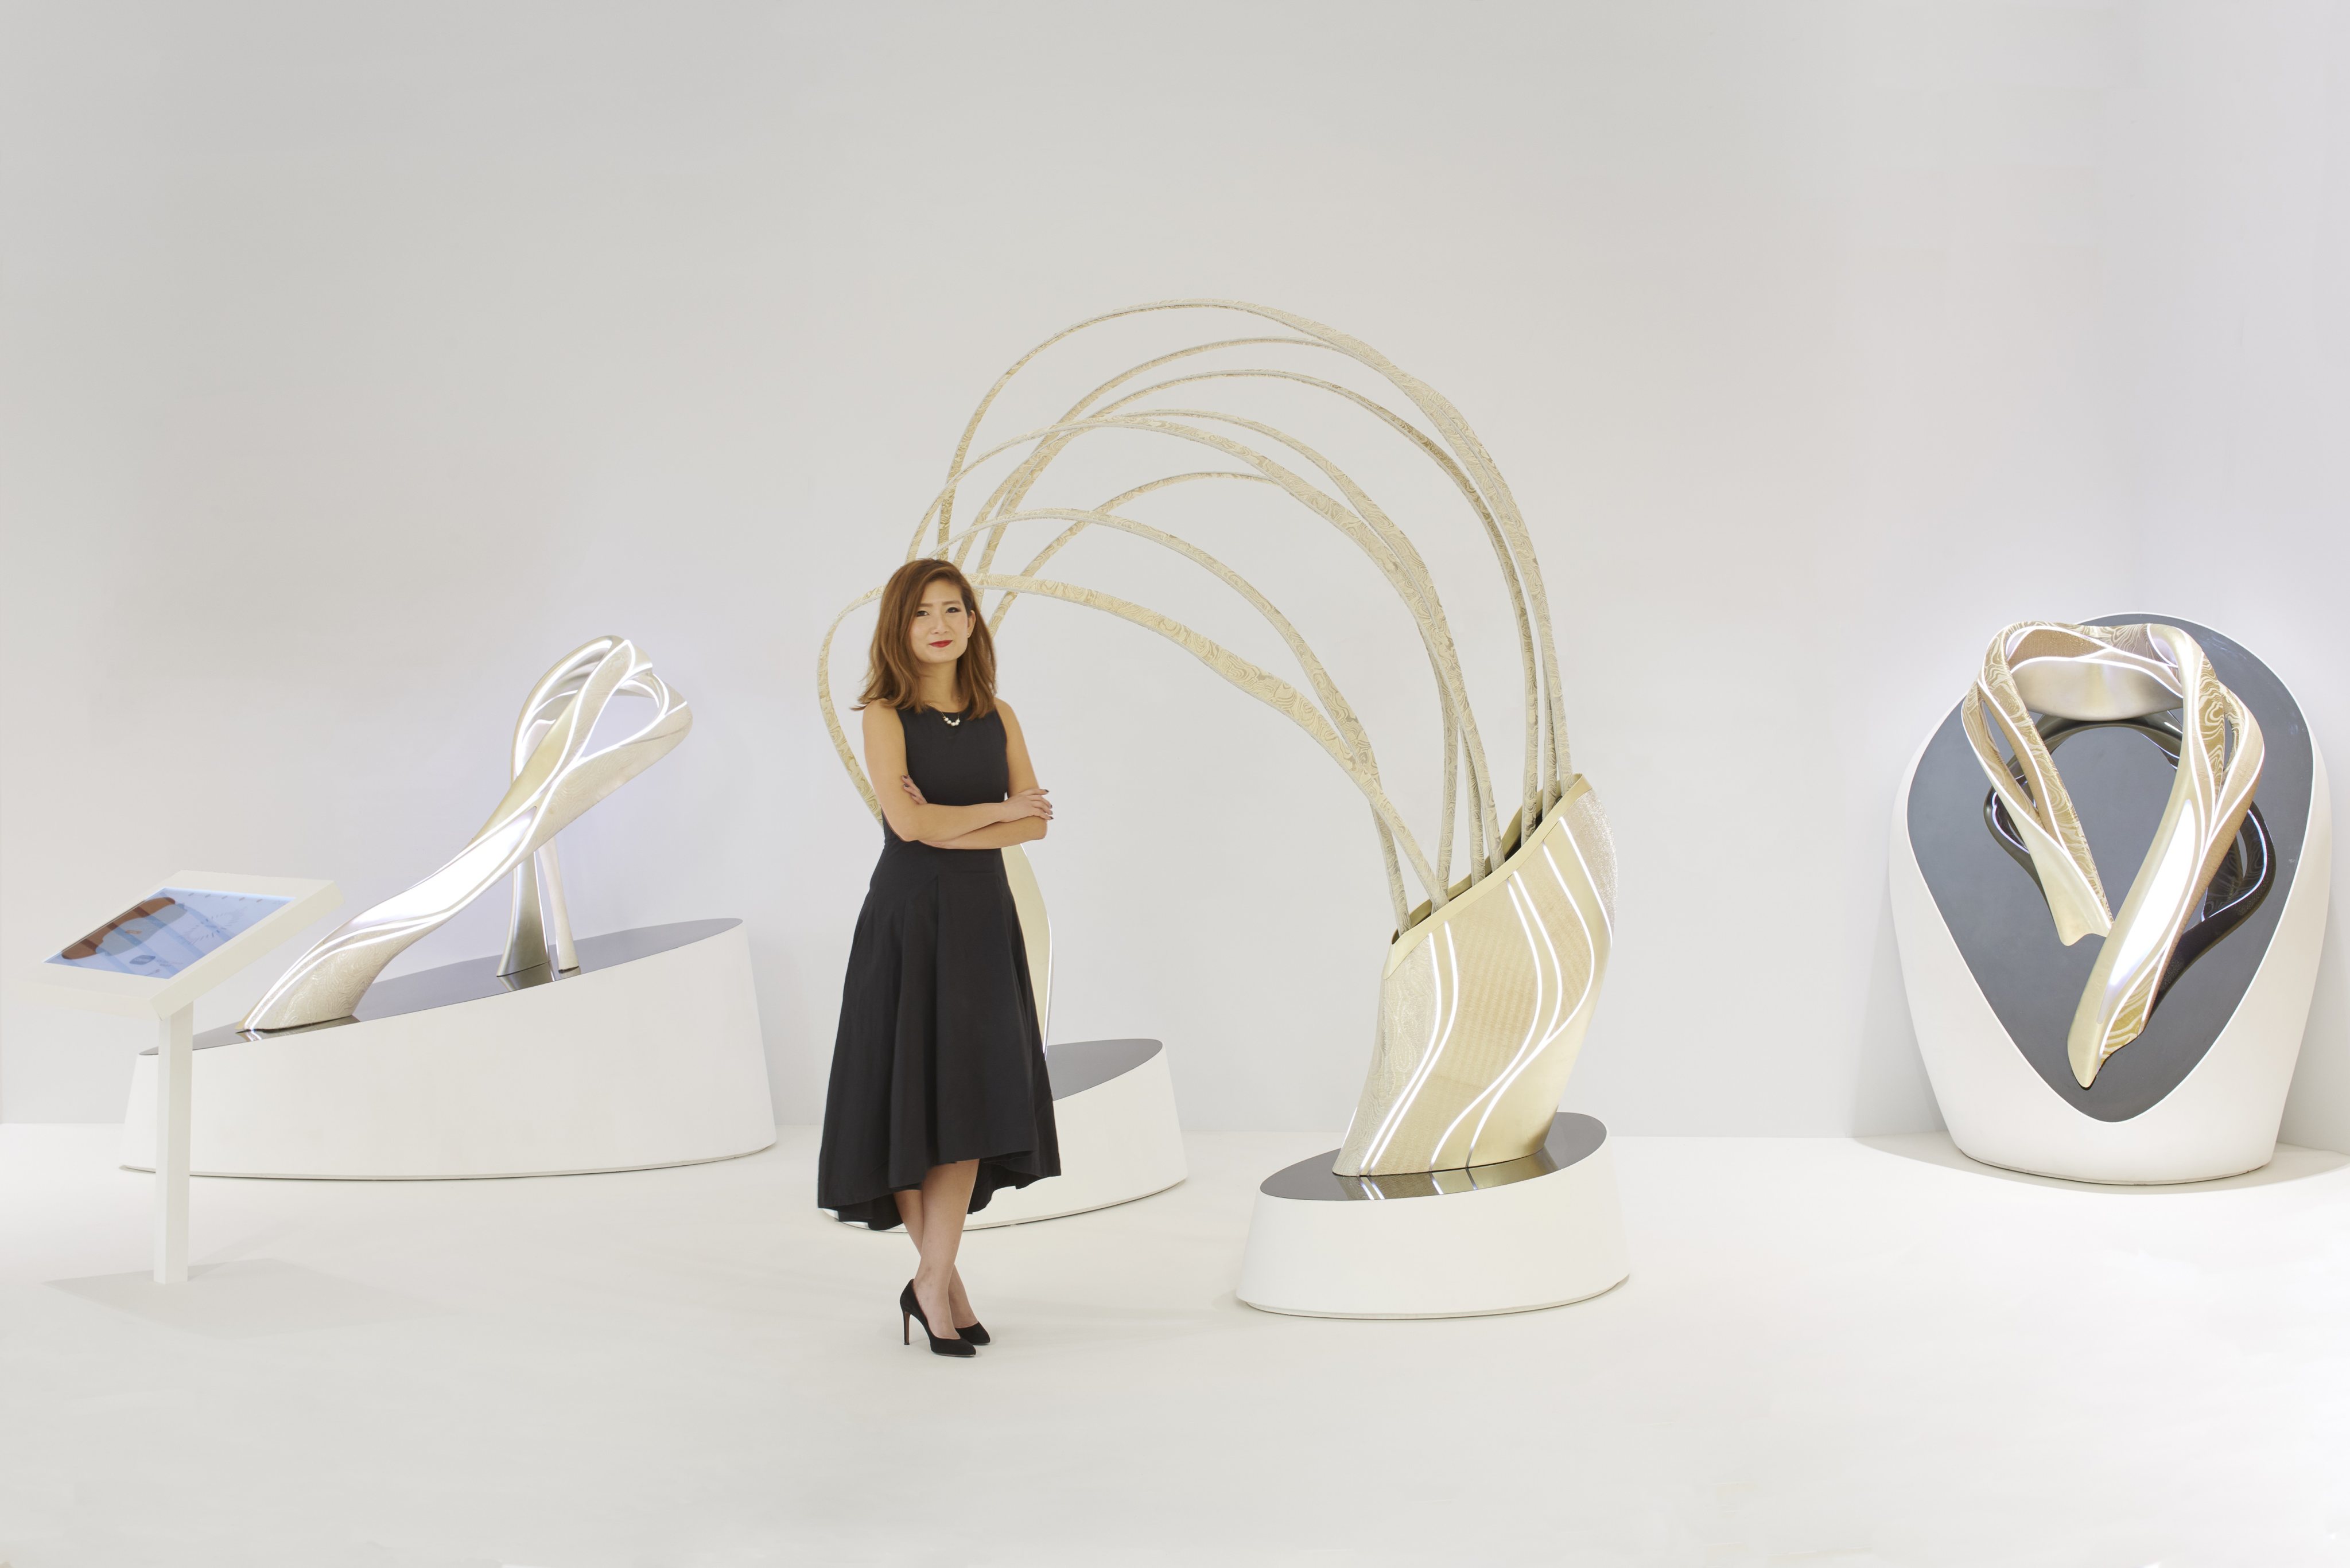 Hong Kong’s Elaine Ng Yan-ling founded The Fabrick Lab, a design house whose innovative works include pieces for Swarovski, UBS bank and the Hong Kong stock exchange. Photos: Handout